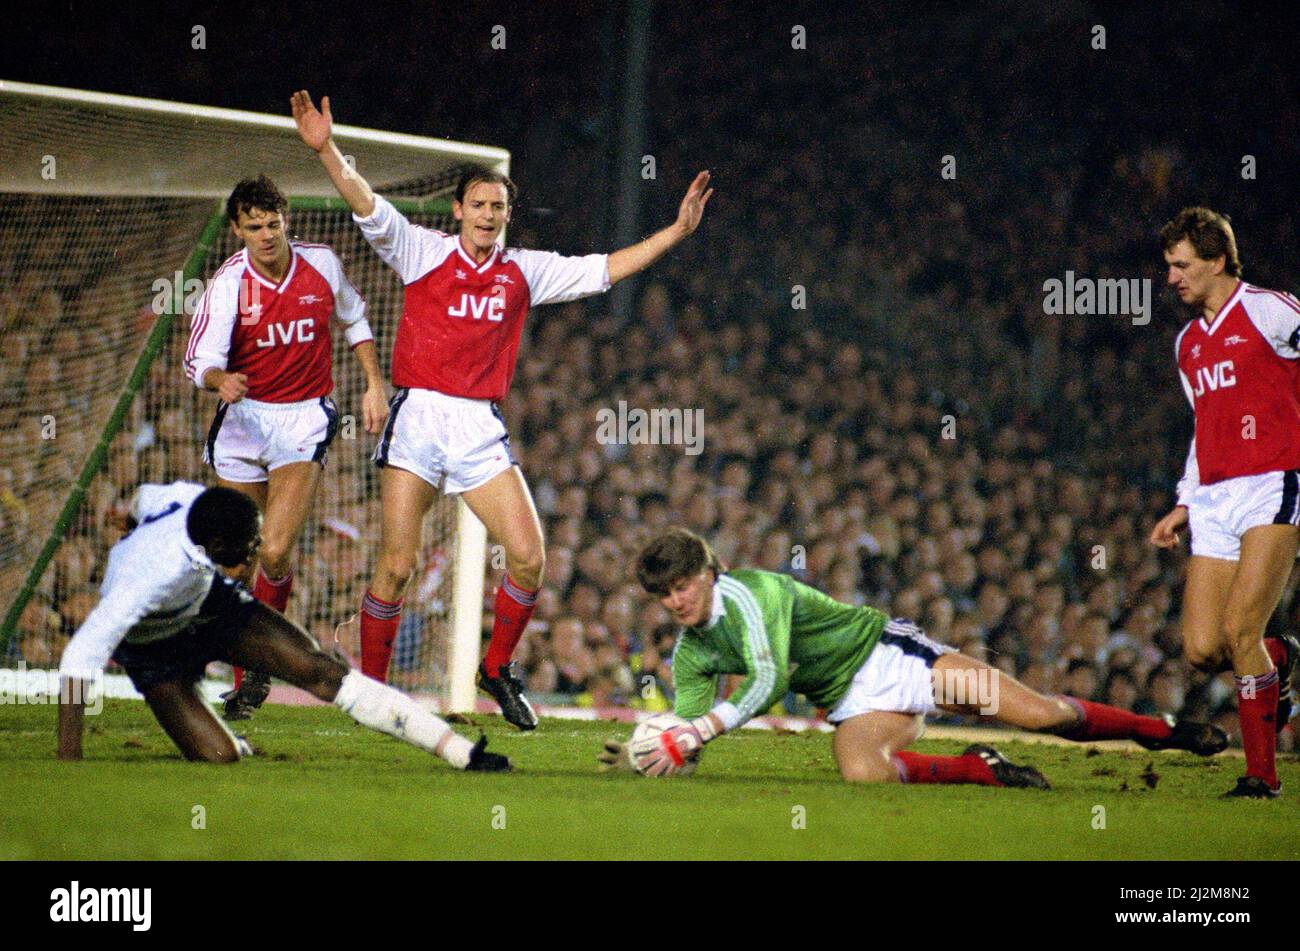 Football English League Division One 1988/89 Season. Arsenal 2 v Tottenham Hotspur 0  at Highbury Arsenal's goalkeeper John Lukic holds onto the ball after a Spurs attack supported by his defenders Stock Photo